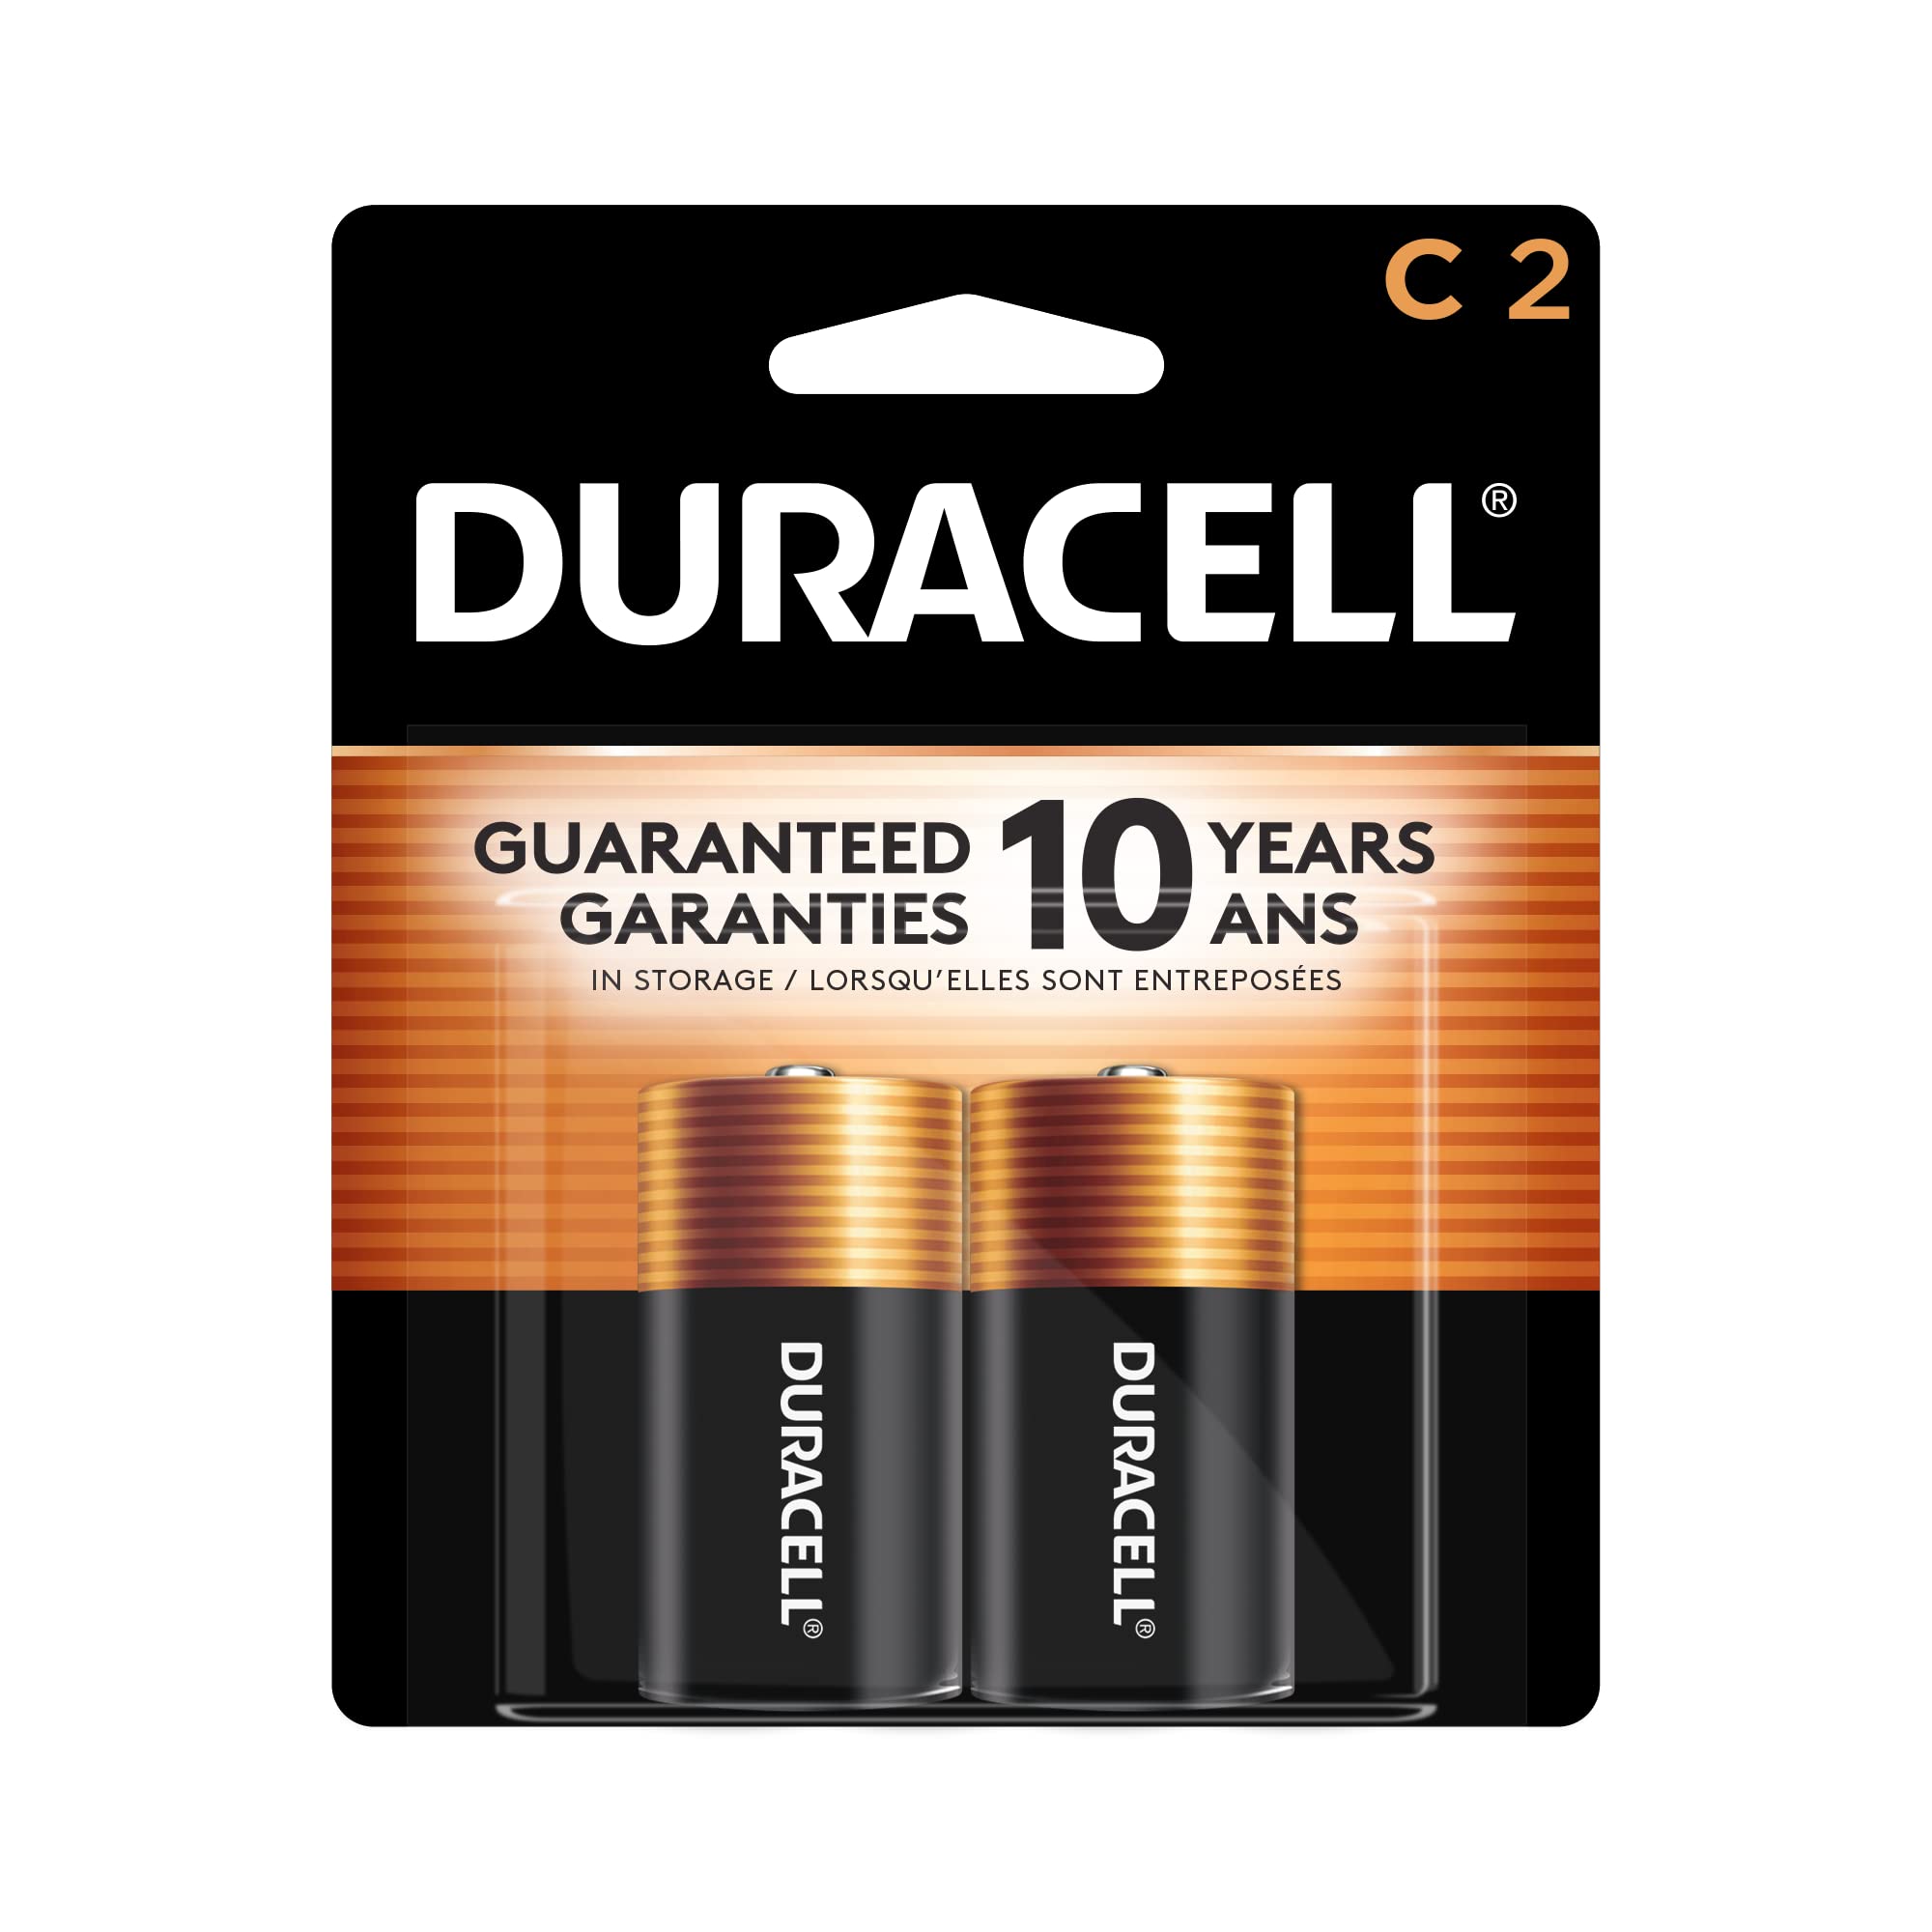 DURACELL Coppertop 1.5V Size C Alkaline Battery, (Pack of 14) - image 1 of 5